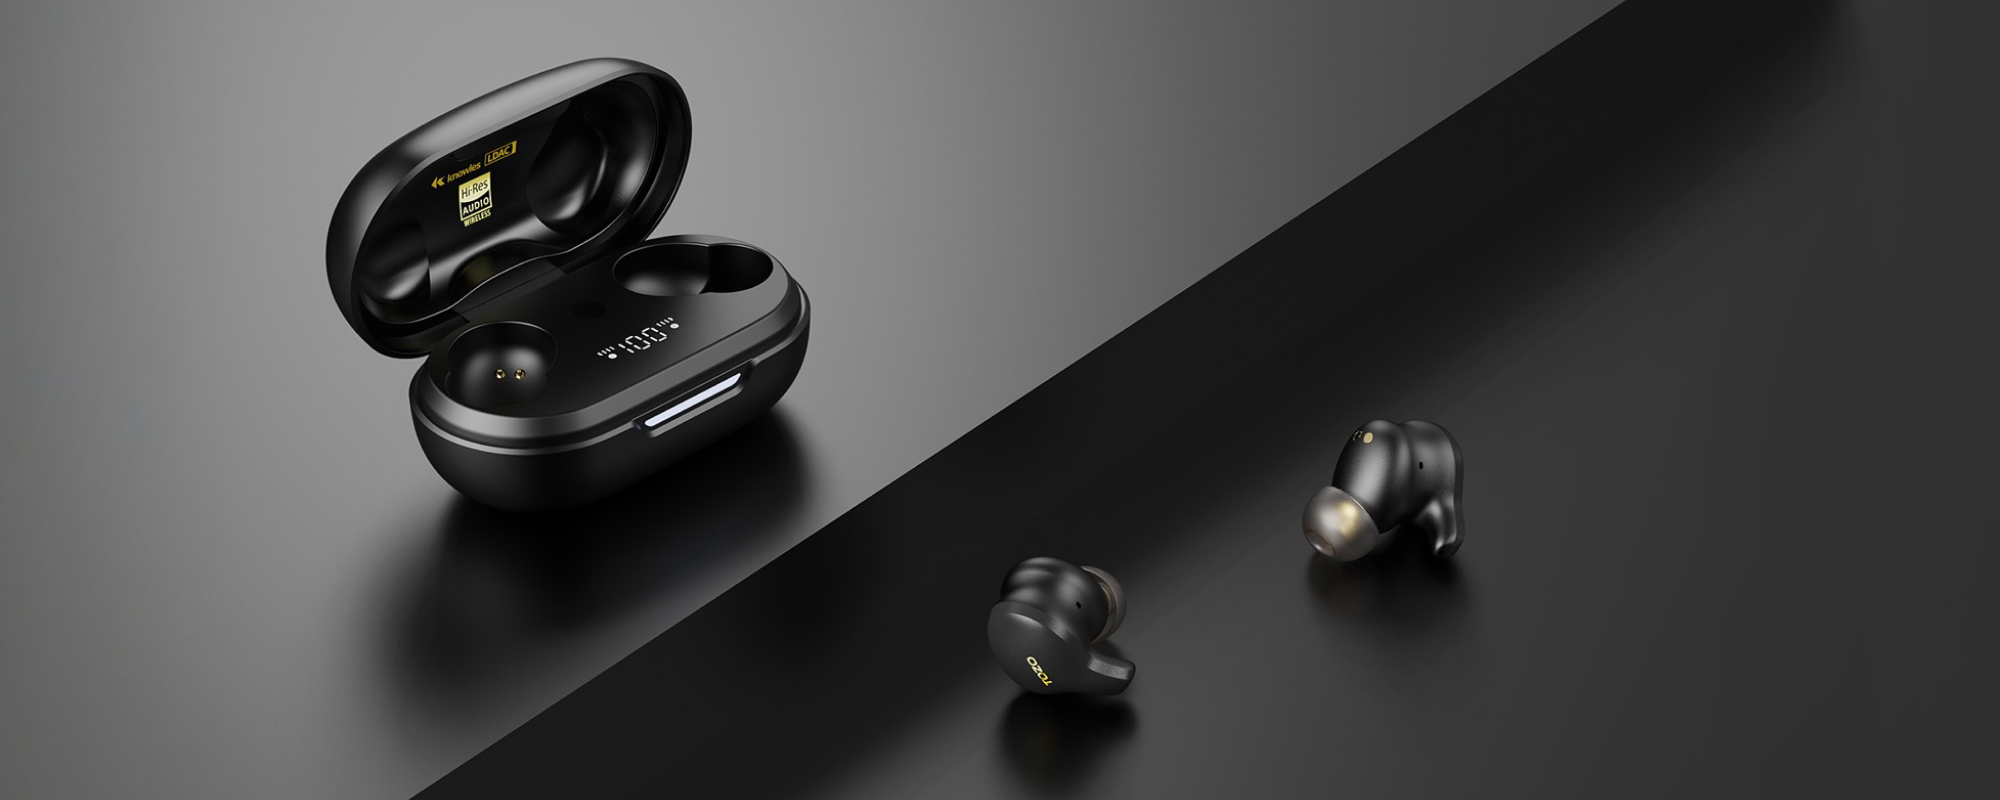 Tozo Gloden X1 Wireless Earbuds Review – Packing and Accessories